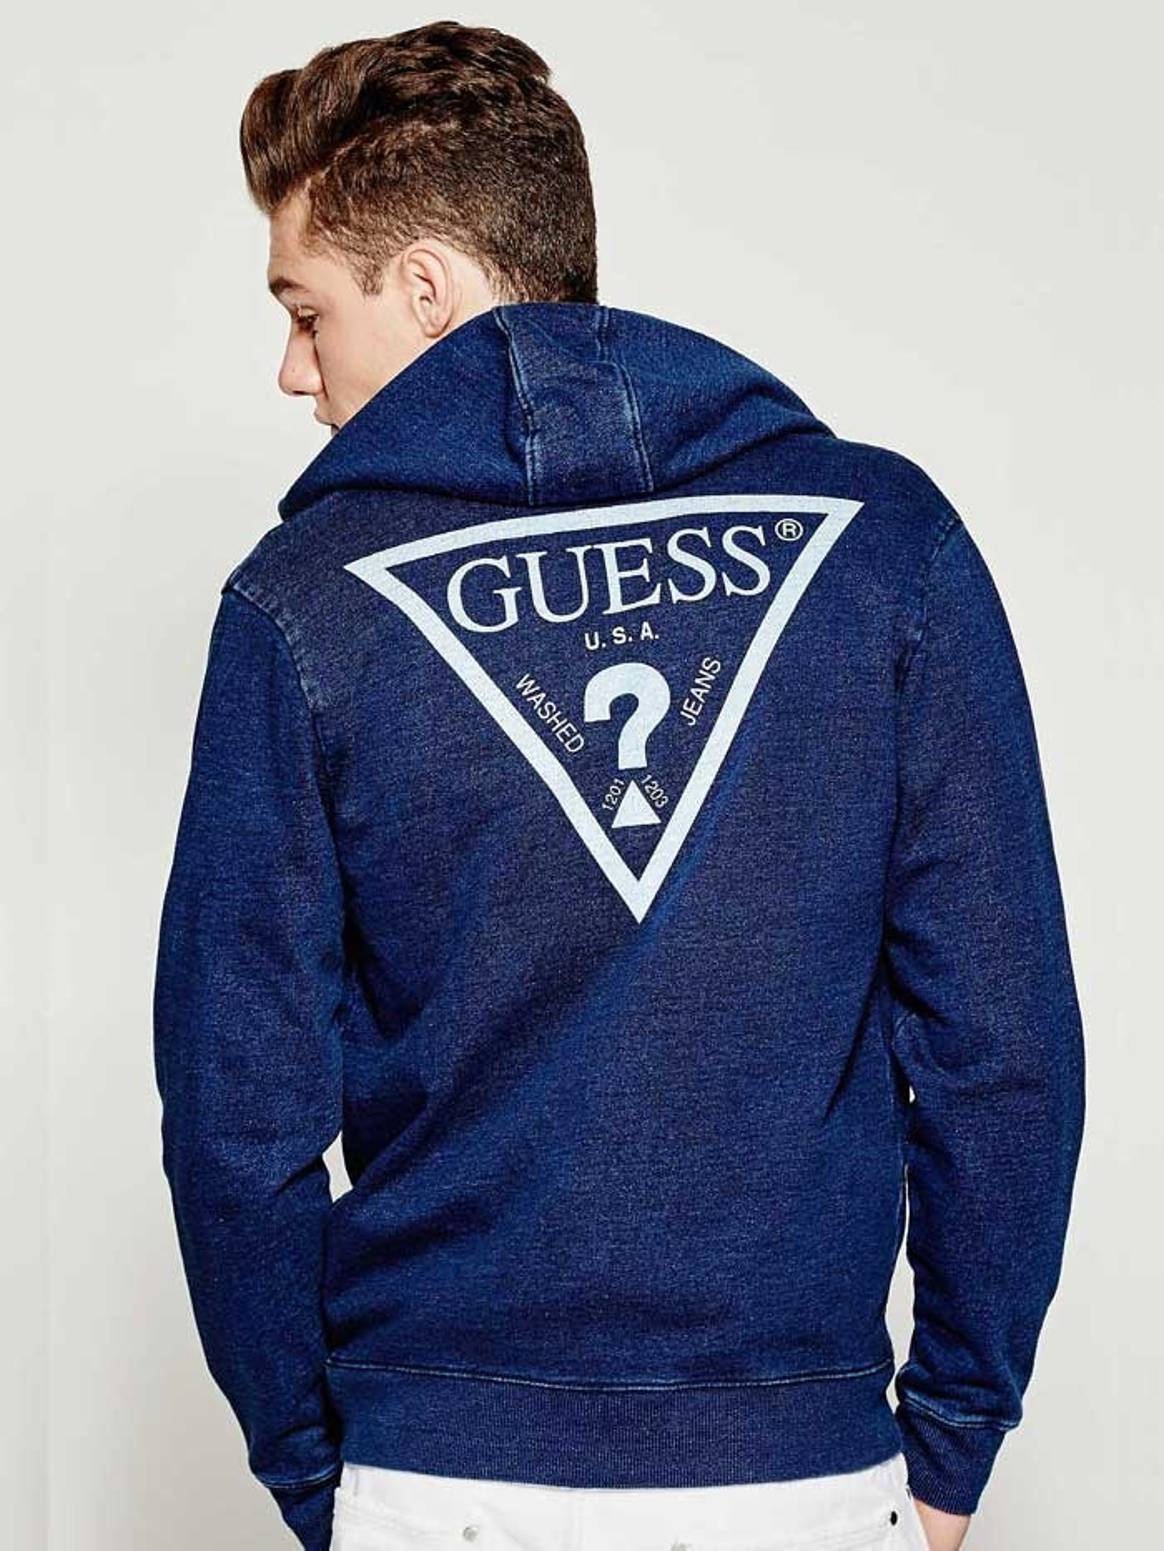 Guess to open flagship in Liverpool